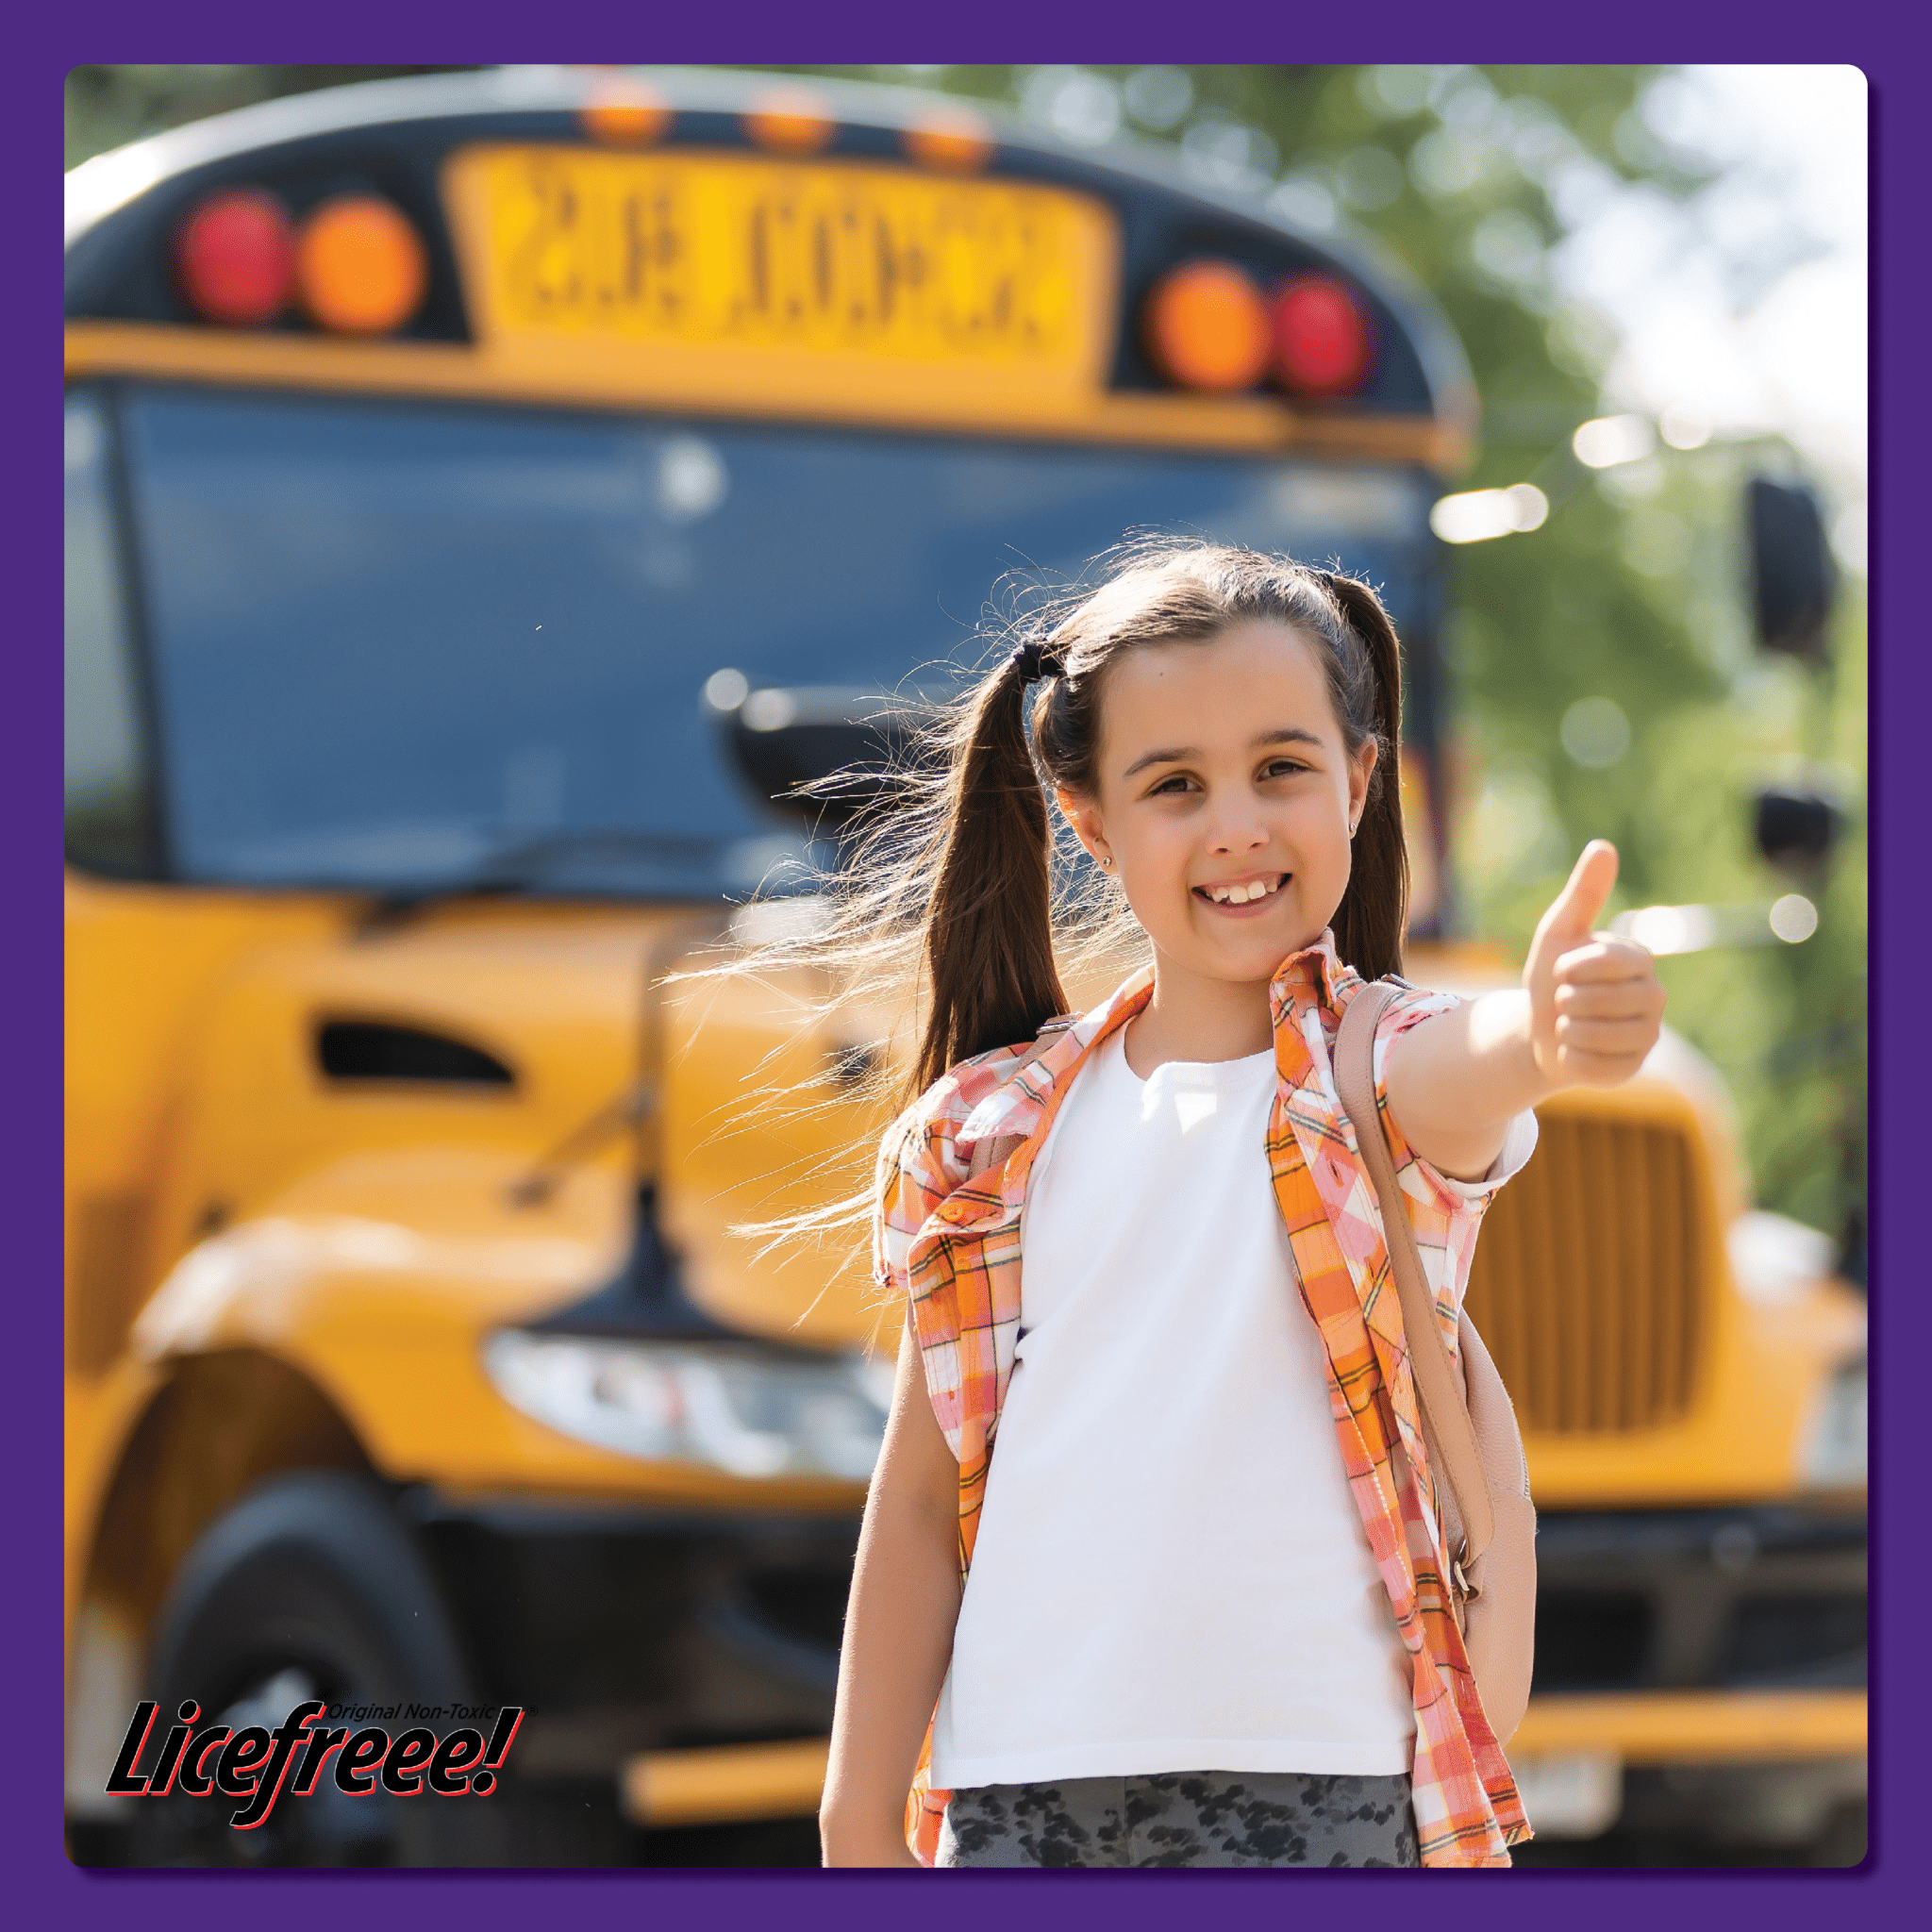 A young girl with two ponytails is showing a thumbs-up in front of a school bus.